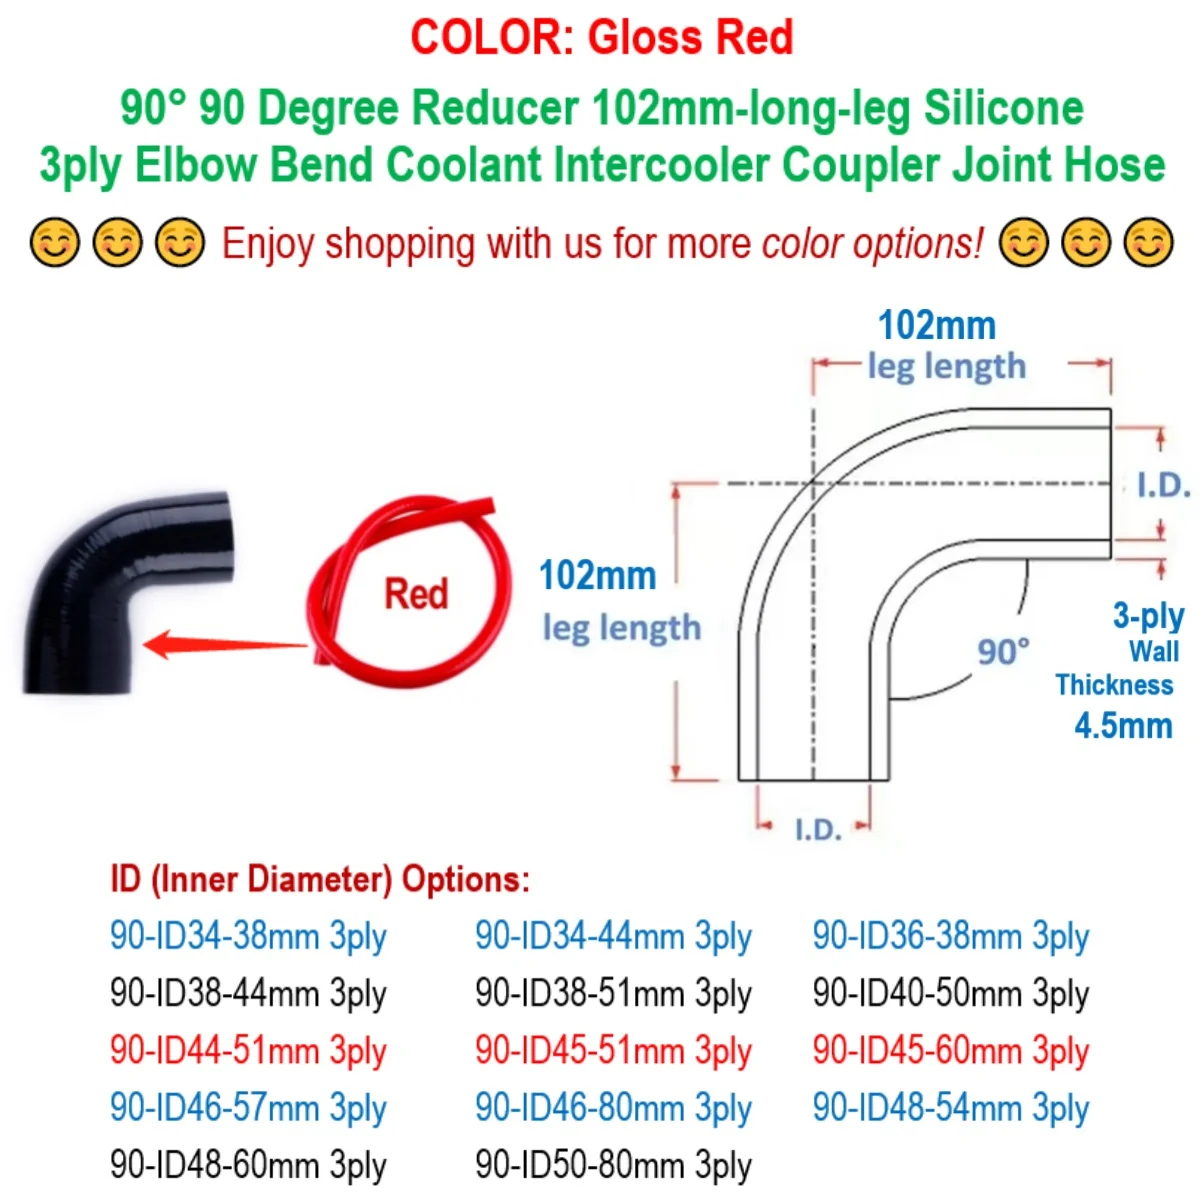 

Gloss Red 90° 90 Degree Reducer Elbow ID 34 36 38 40 44 45 46 48 50 51 54 57 60 80 mm Silicone Coupler Hose 3ply 102mm-long-leg